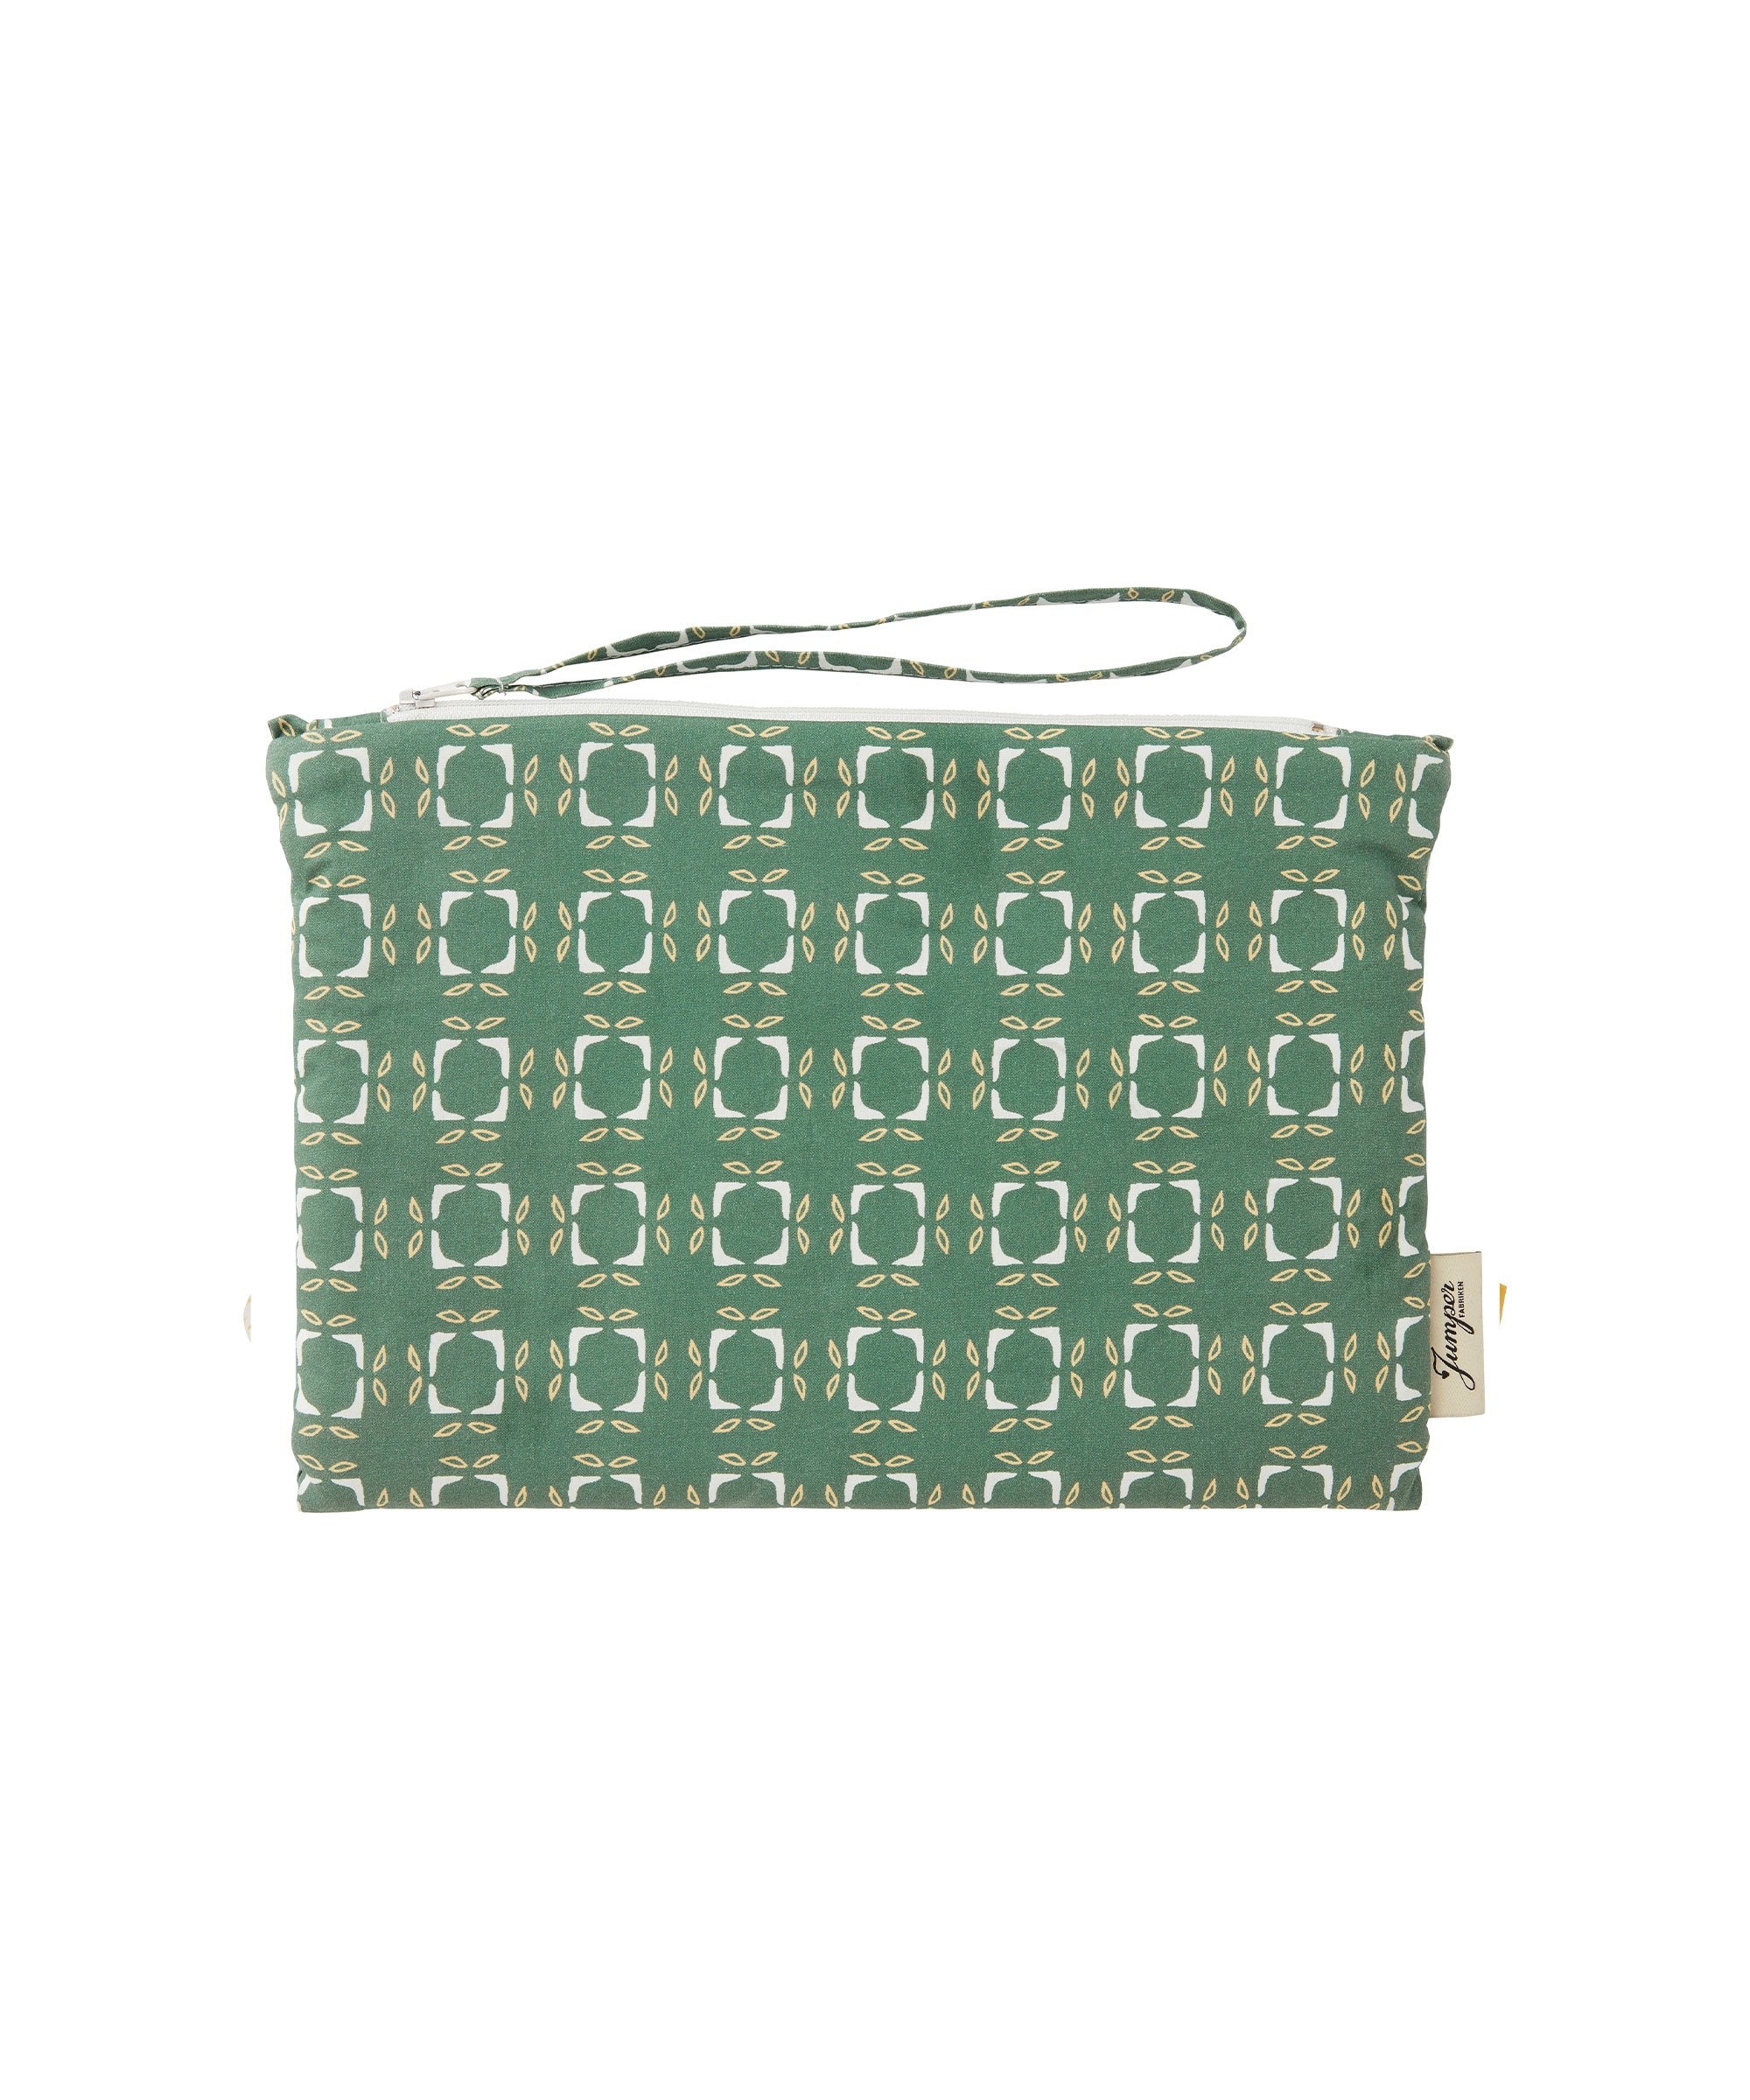 Frankie CosmeticBag Green